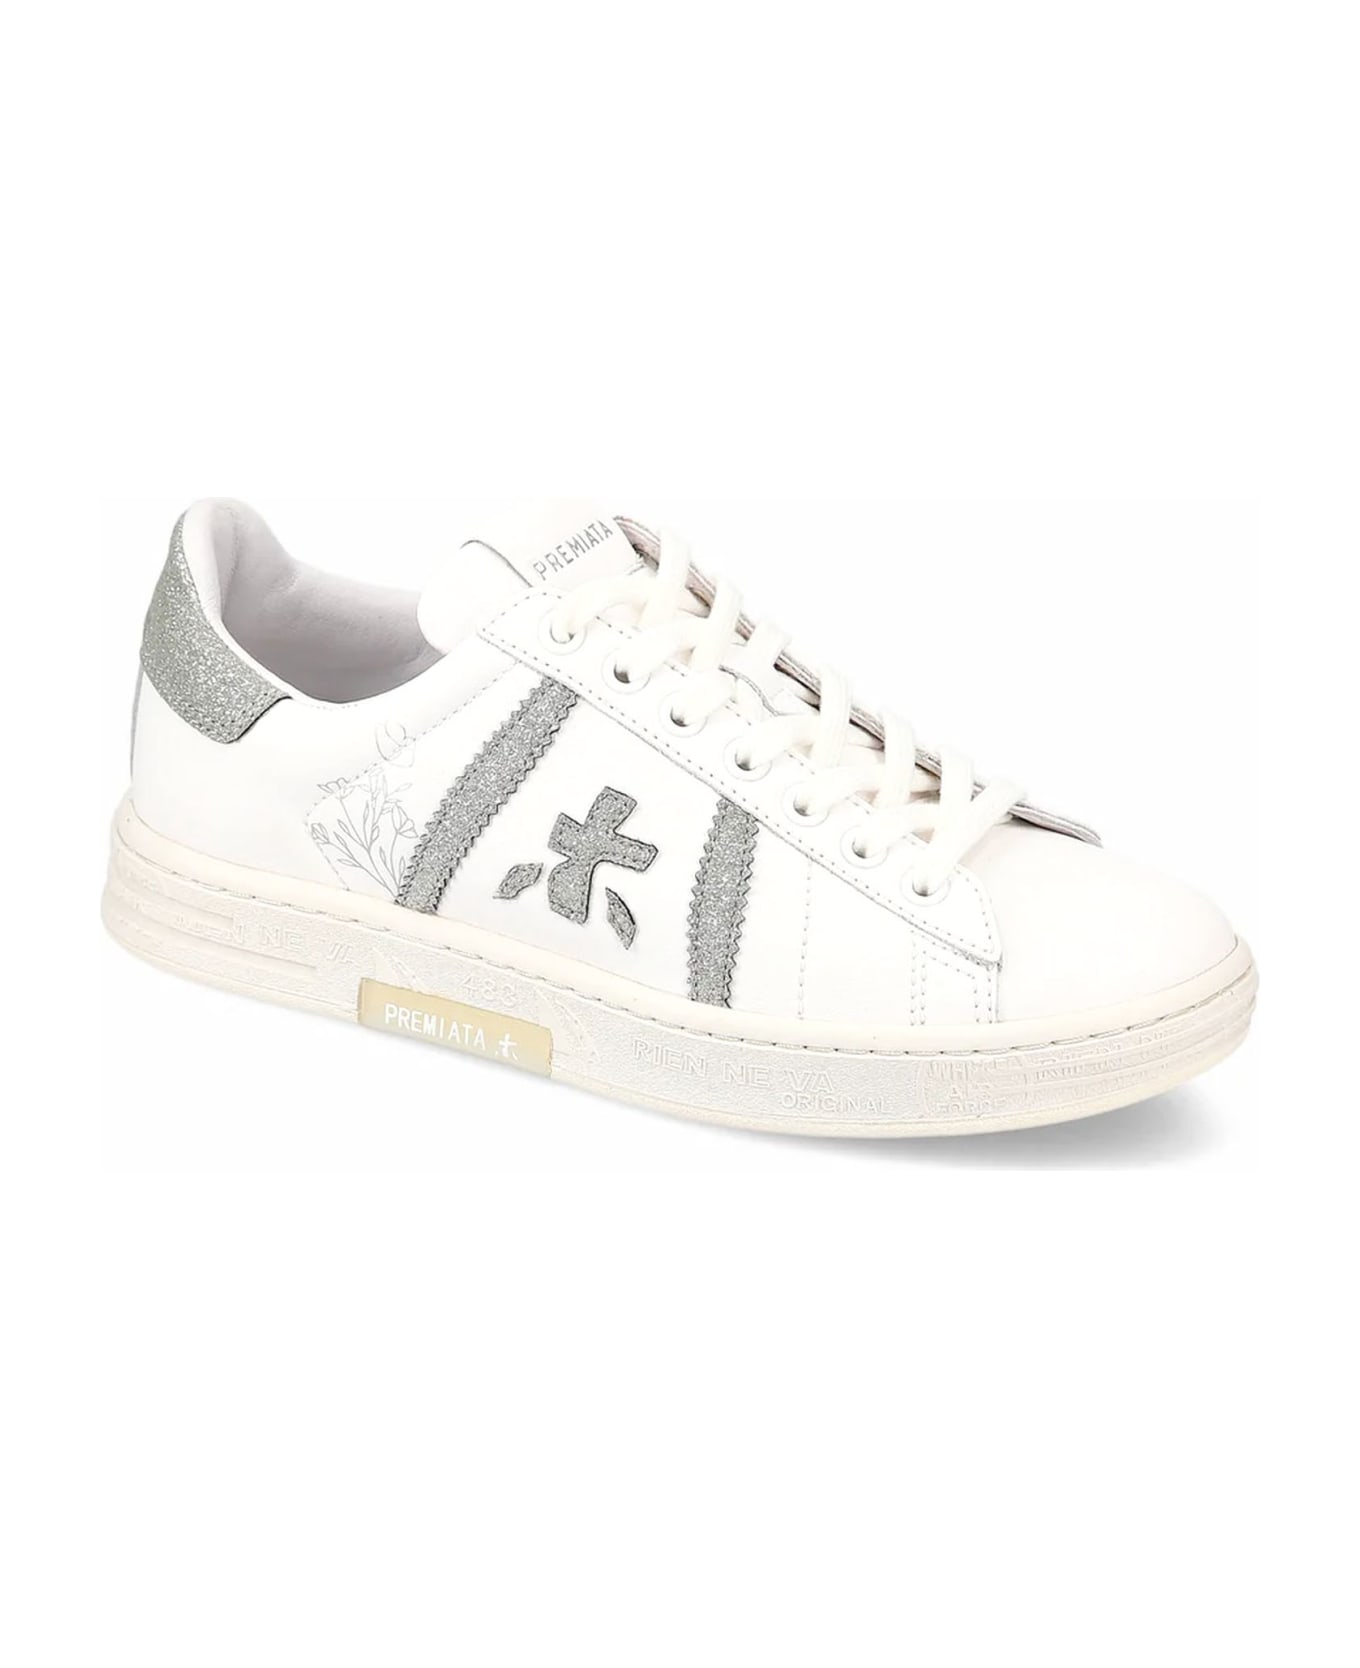 Premiata Russell Sneakers - white スニーカー